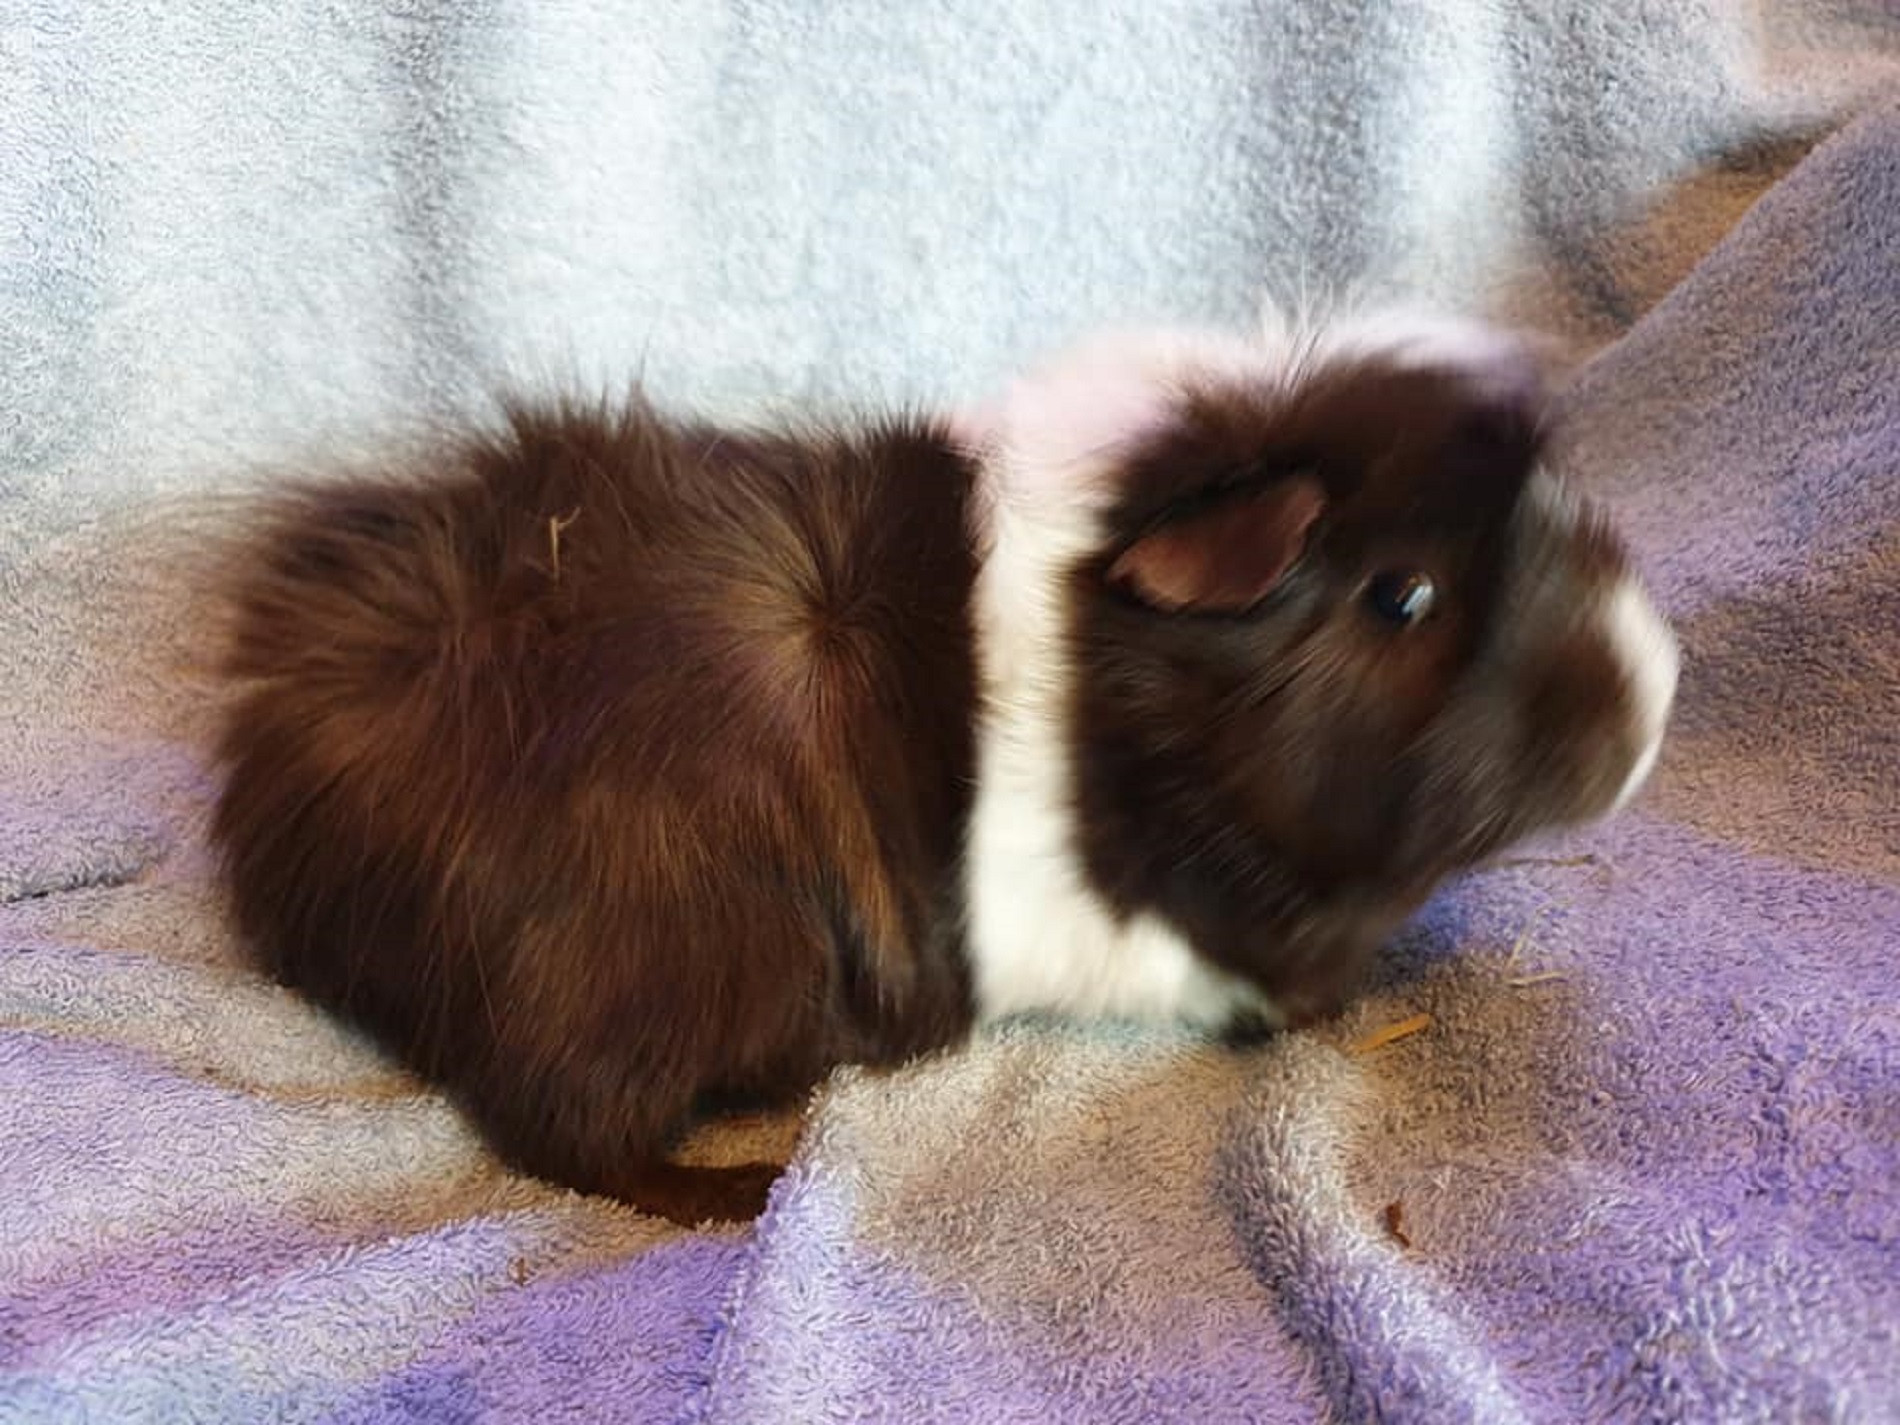 WOODY (was SQUEAK) Sept 2014 to January 28th 2020